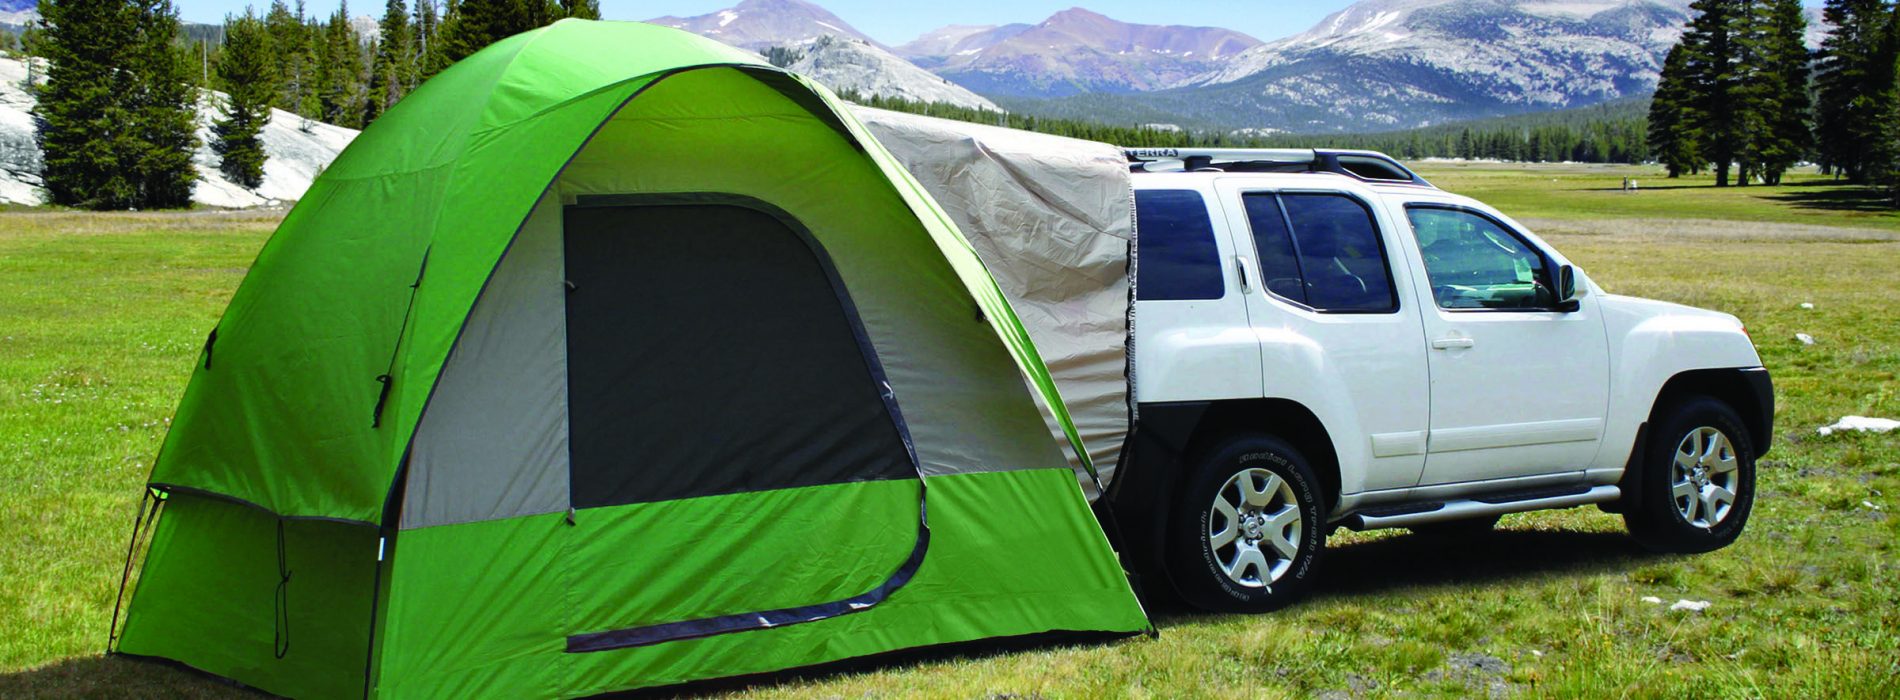 Factors to Consider Prior to Purchasing Vehicle Camping Tents